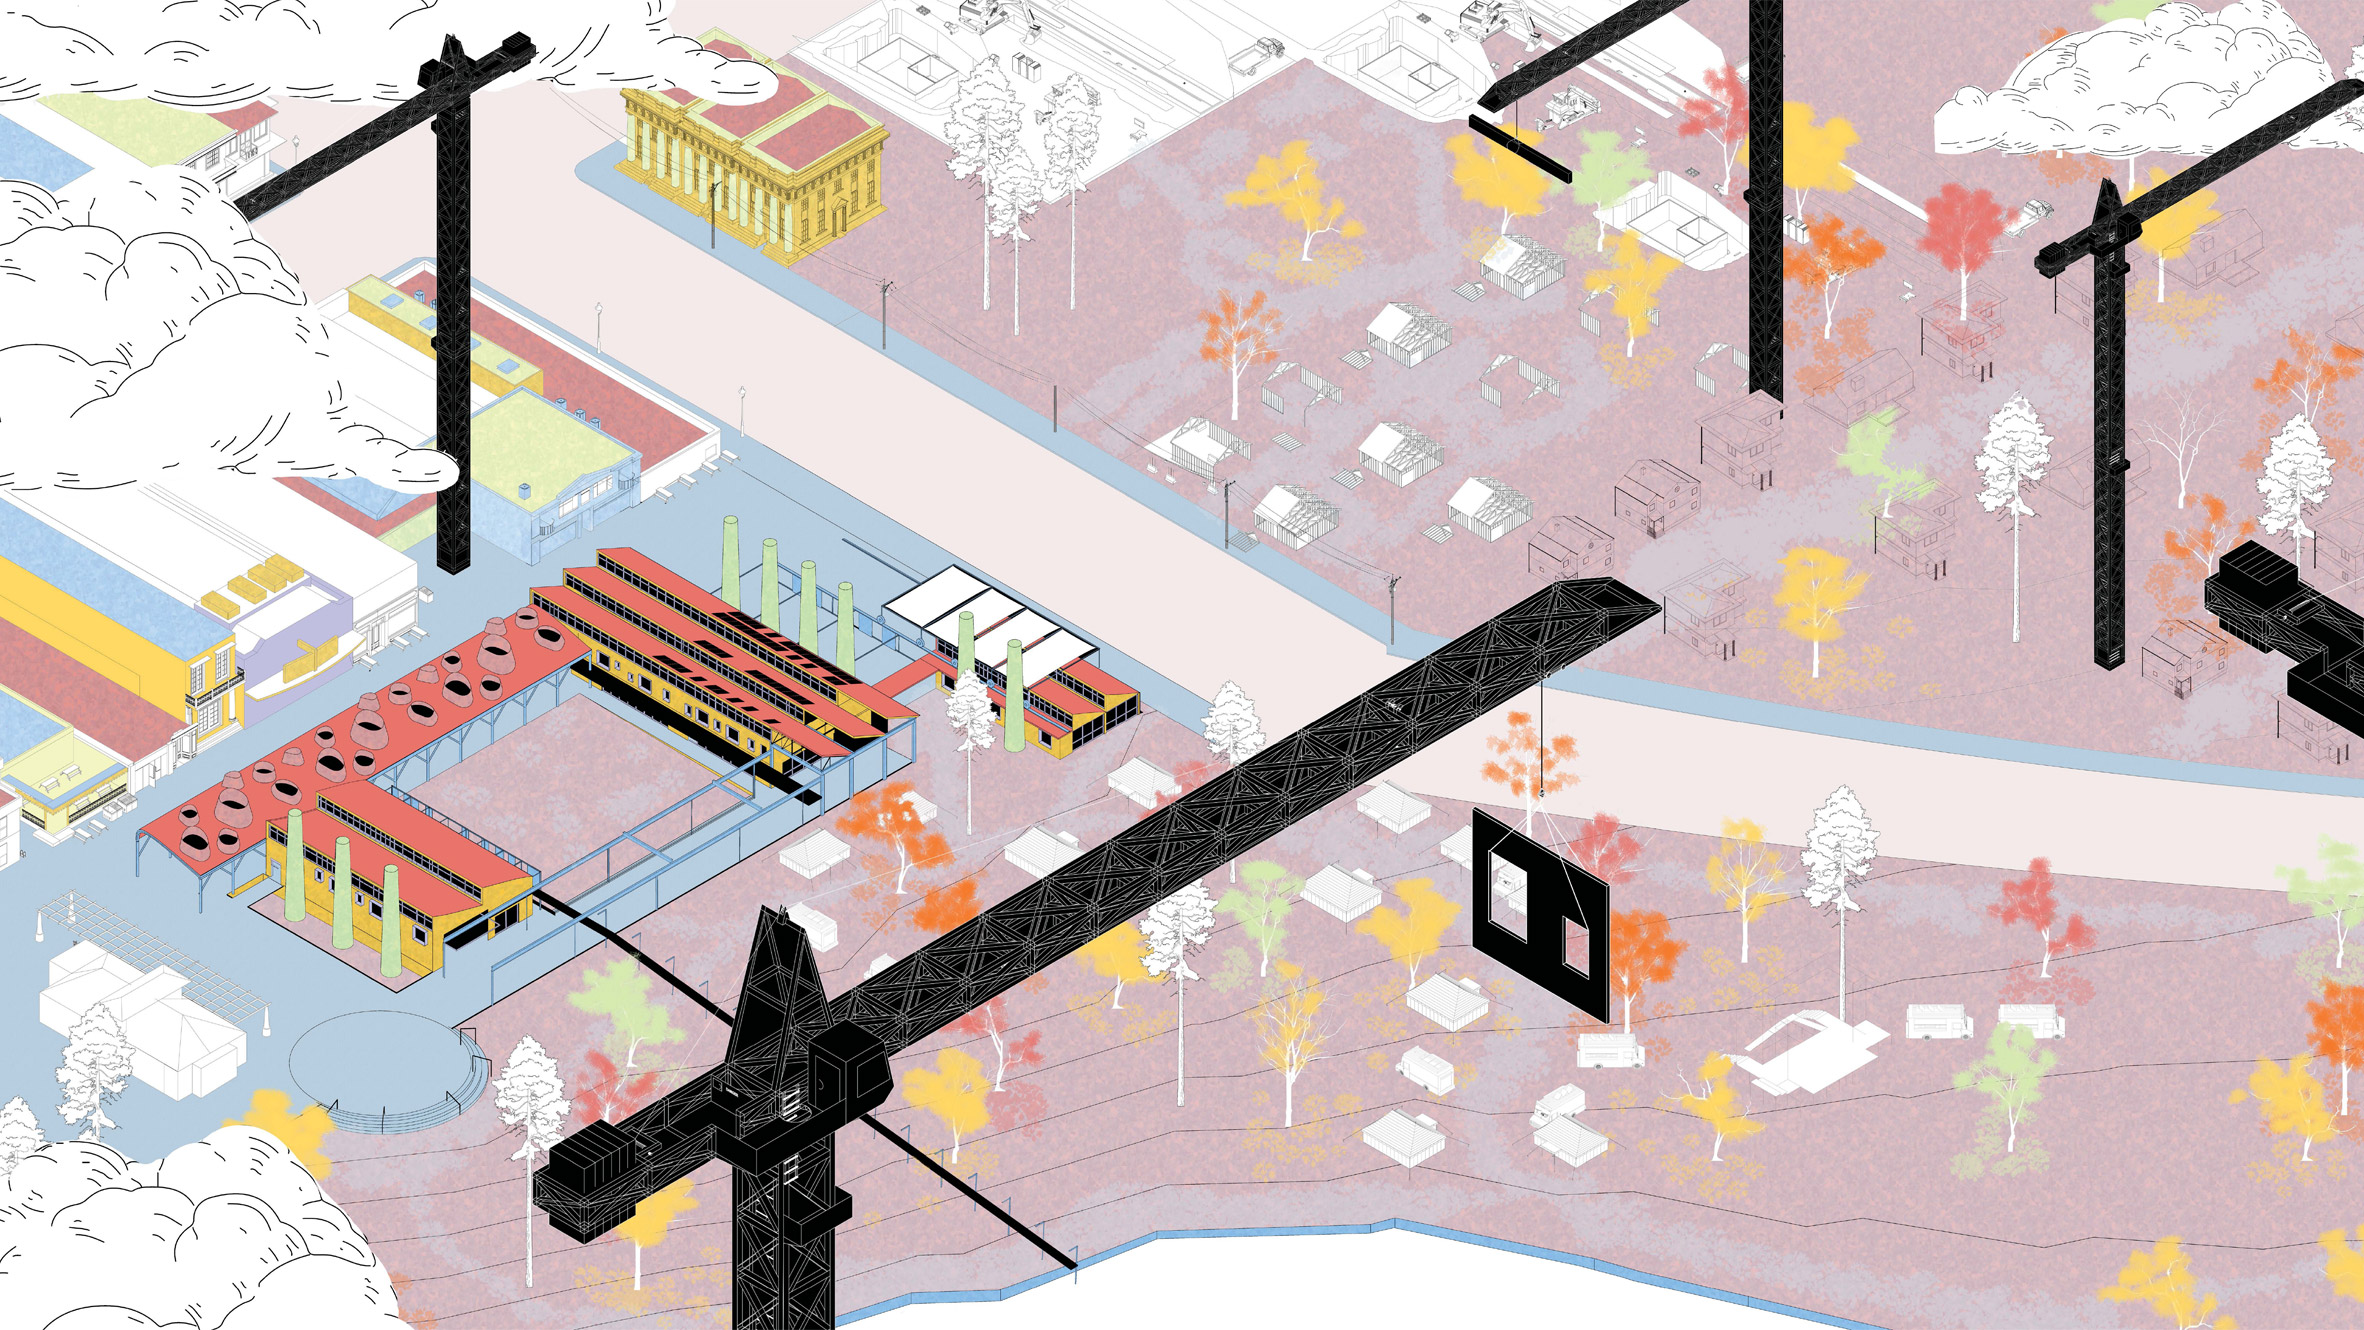 Colourful axonometric drawing of a city plan with cranes presented on Dezeen School Shows